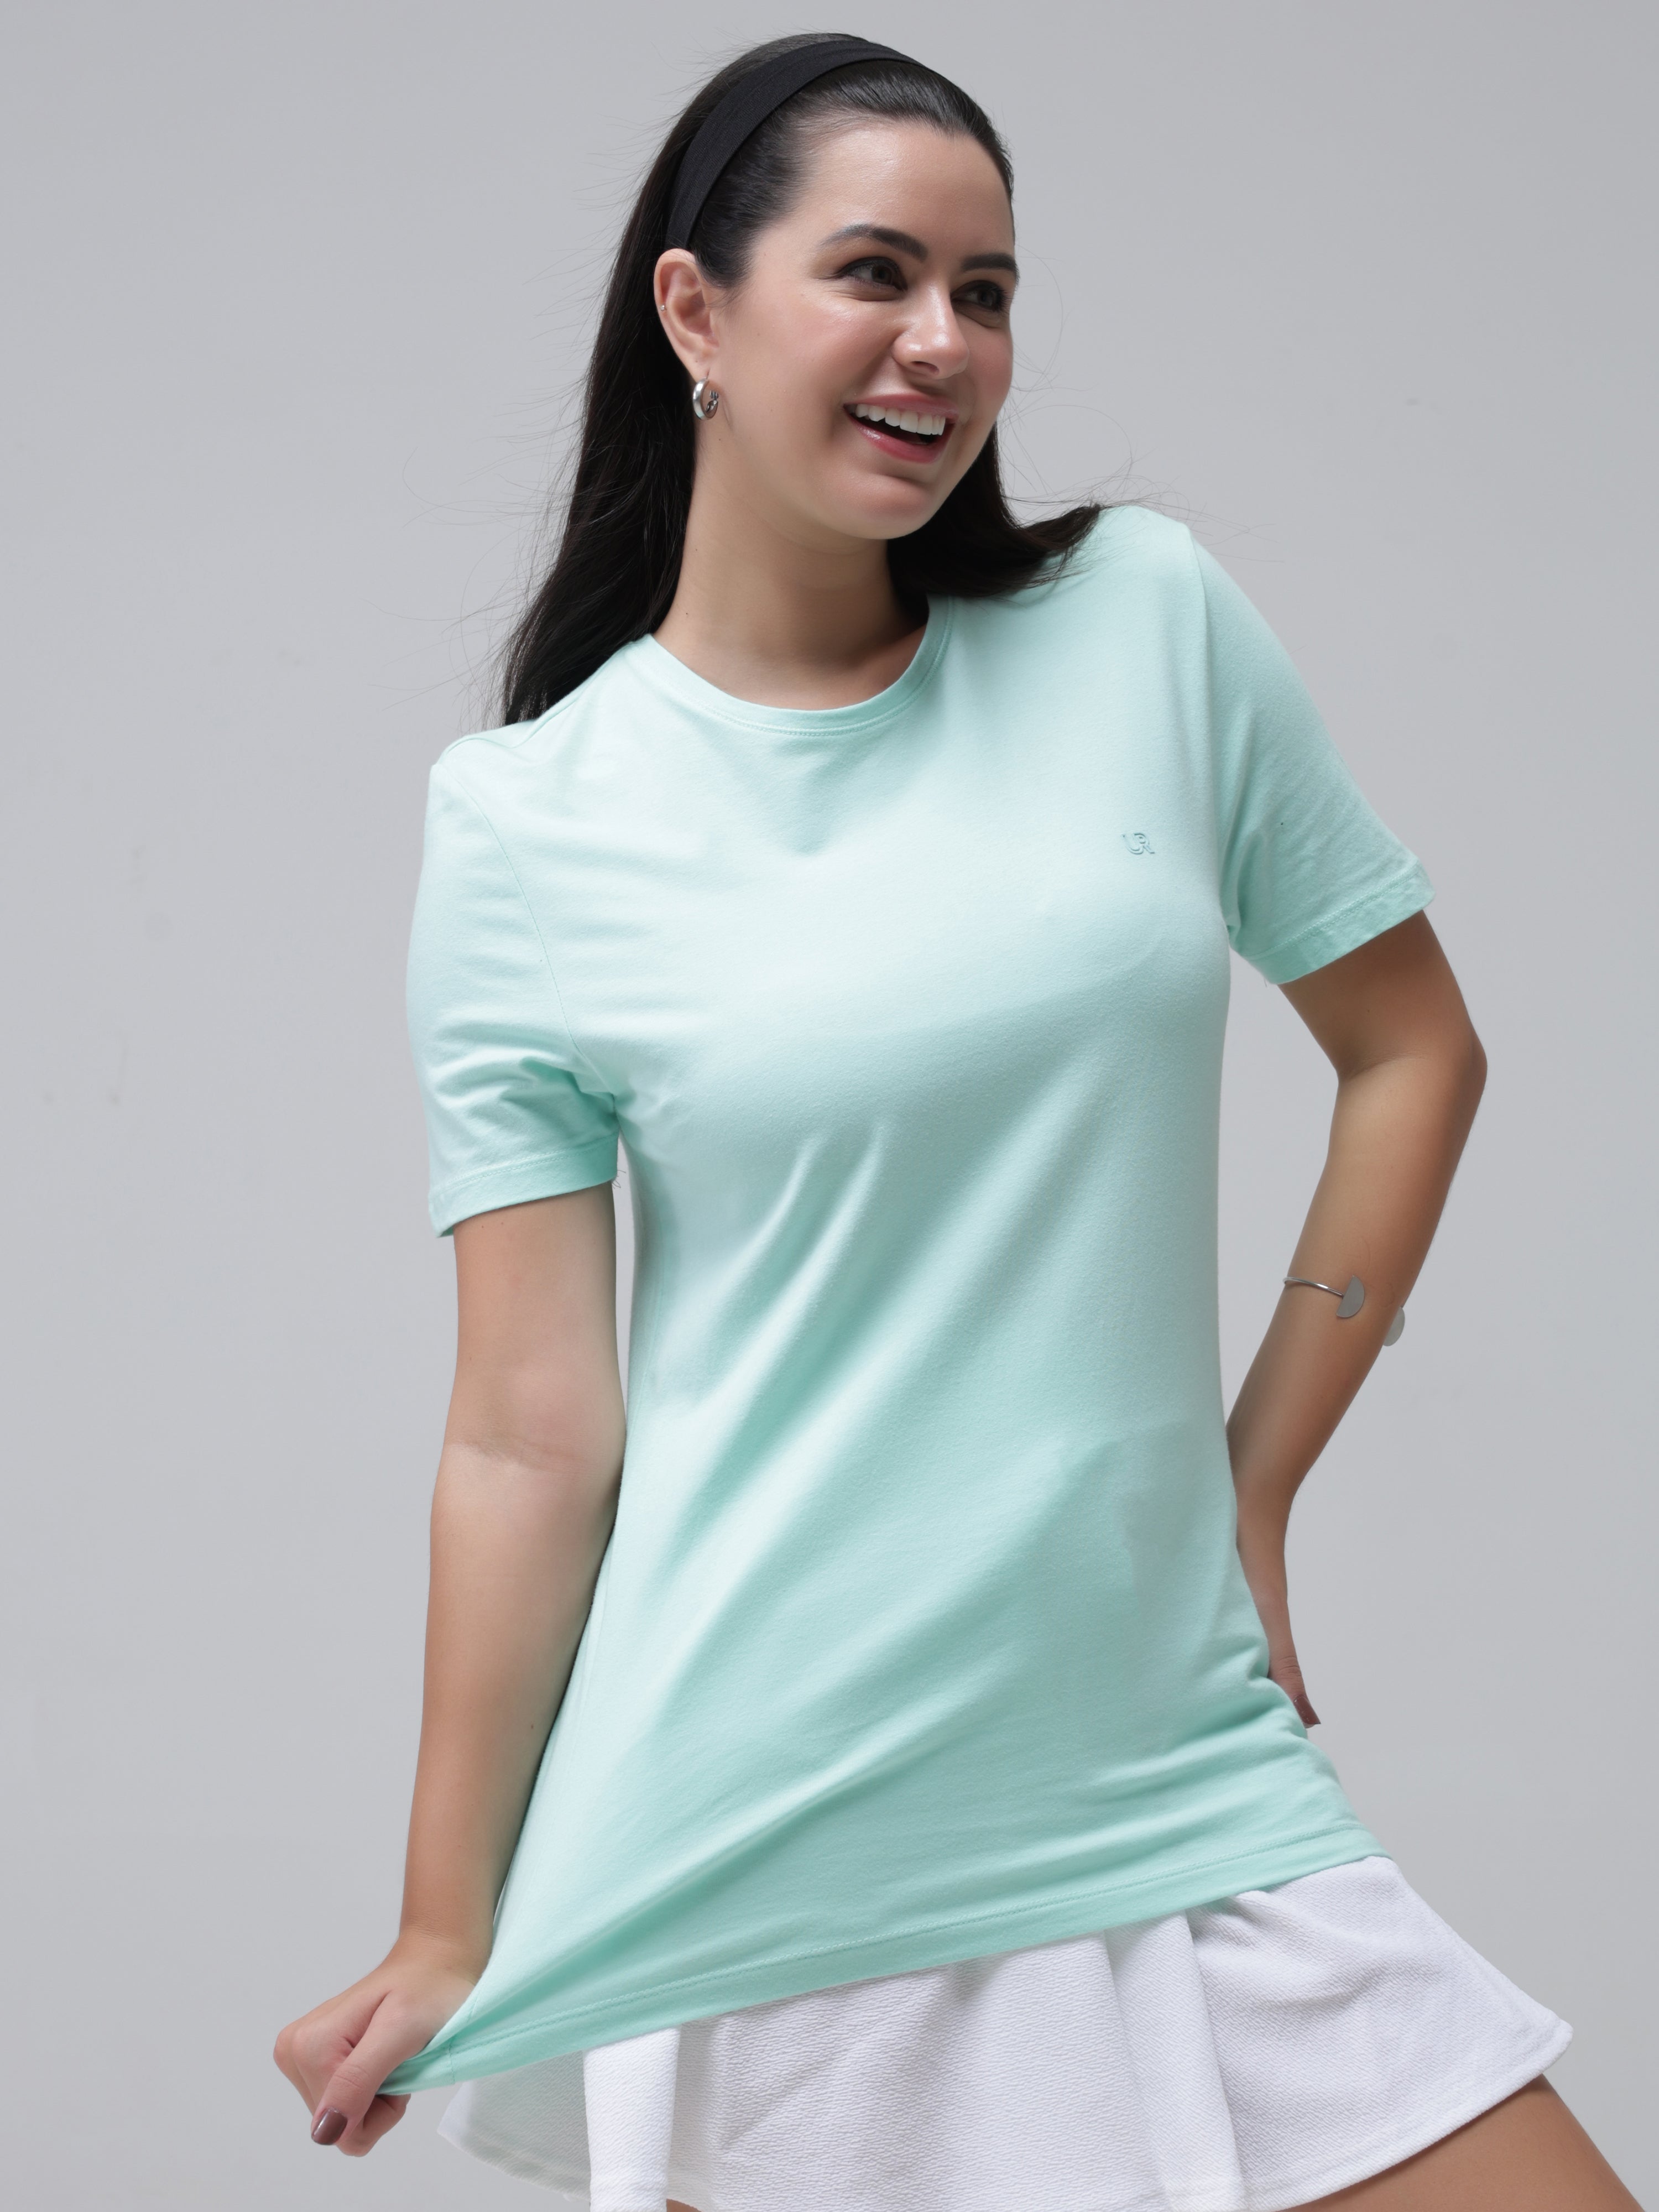 Woman wearing a stylish round-neck Aquamarine Turms T-shirt made from 95% premium cotton and 5% spandex, stain-proof and odor-resistant.